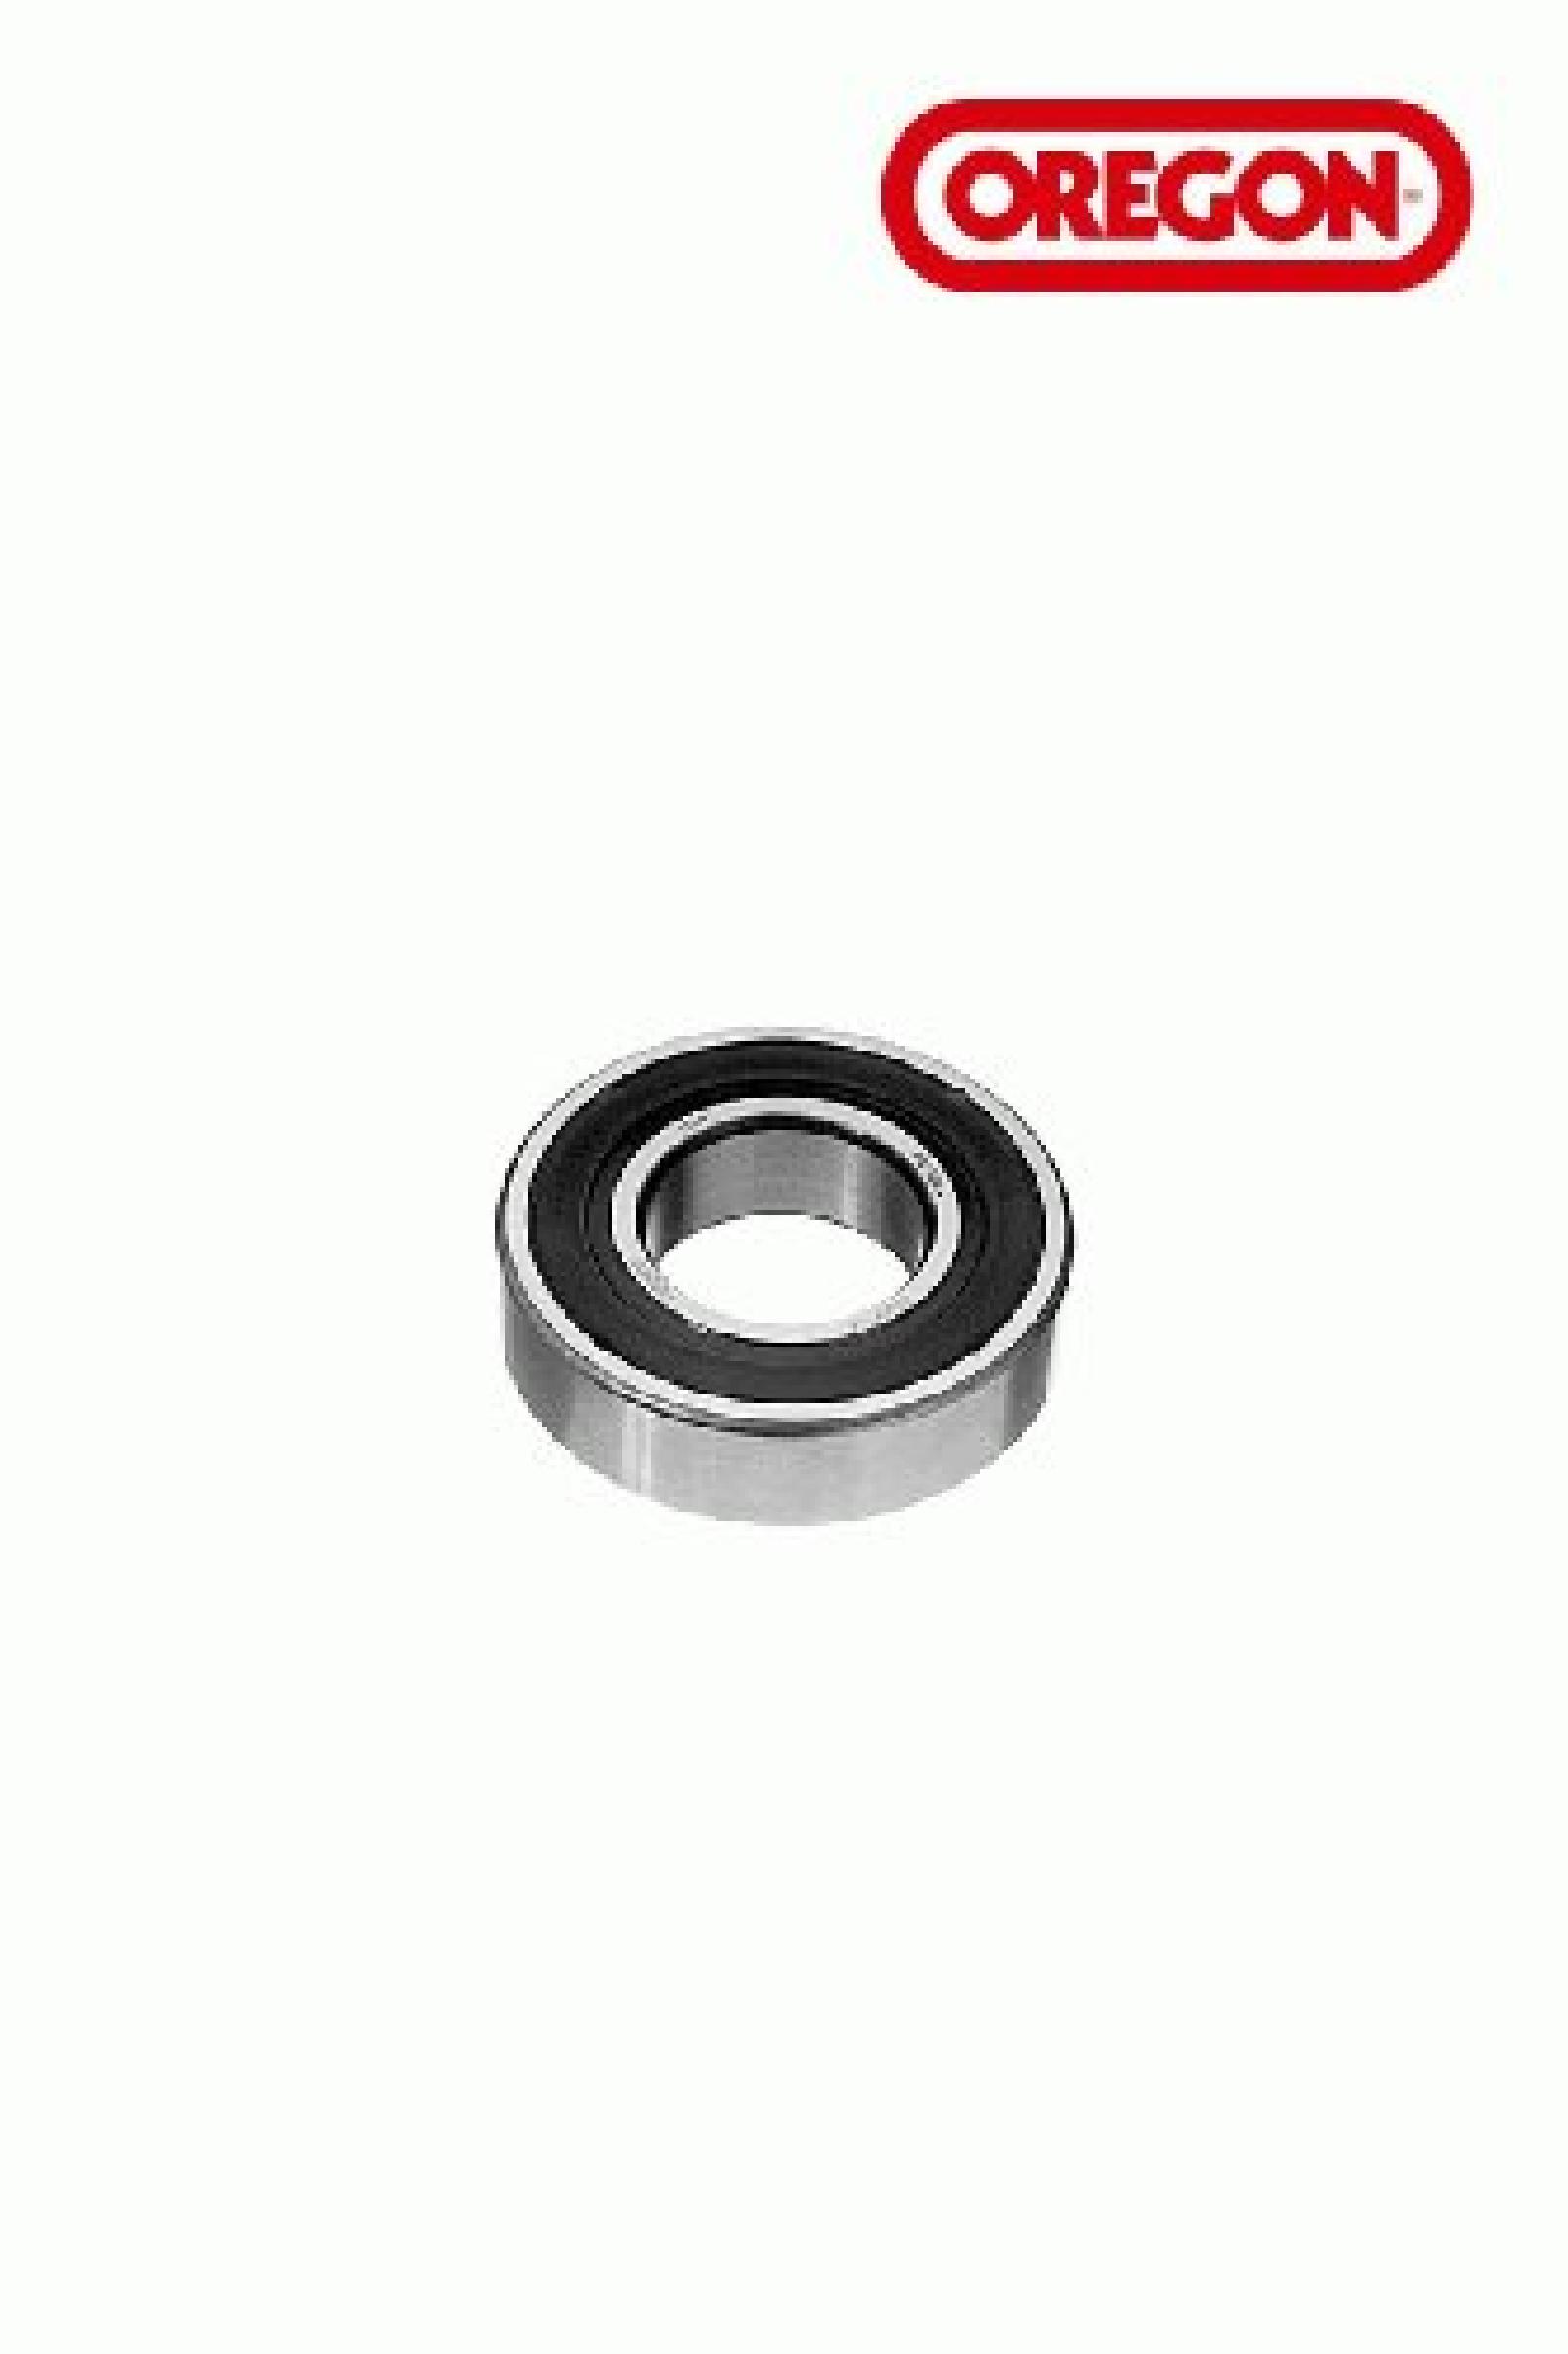 BEARING, BALL MAGNUM 6206 part# 45-207 by Oregon - Click Image to Close